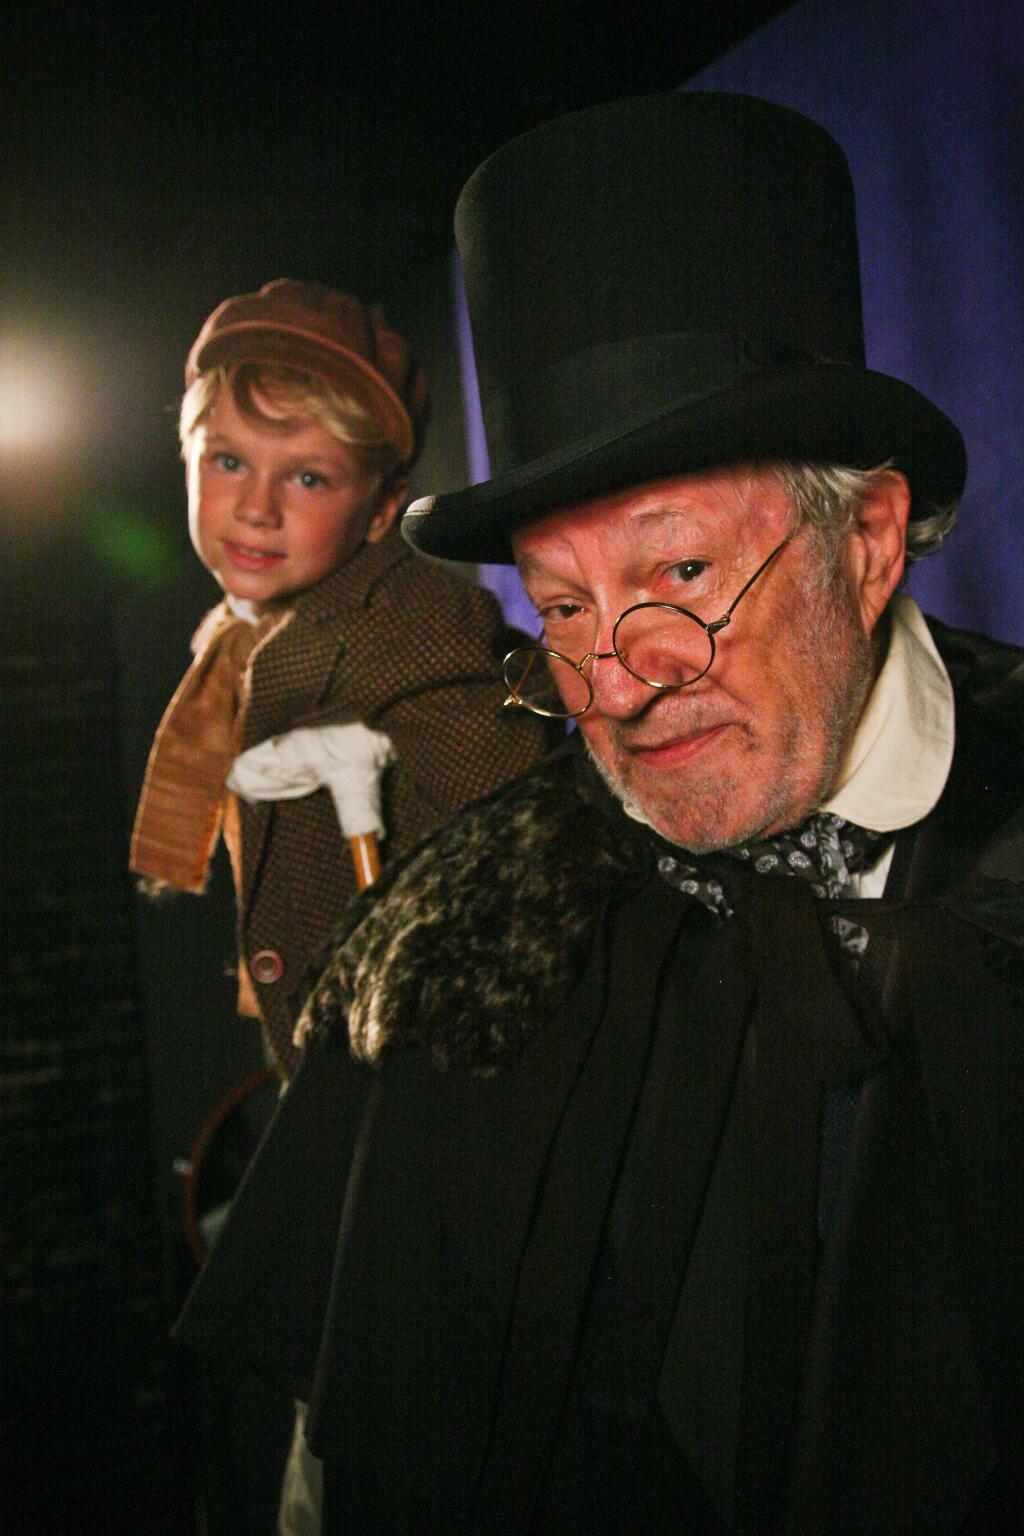 Veteran actor Charles Siebert (TV's 'Trapper John, M.D') is back as Ebenezer Scrooge in the 6th Street Playhouse production of 'A Christmas Carol' at the G.K. Hardt Theater in Santa Rosa. (ERIC CHAZANKIN)